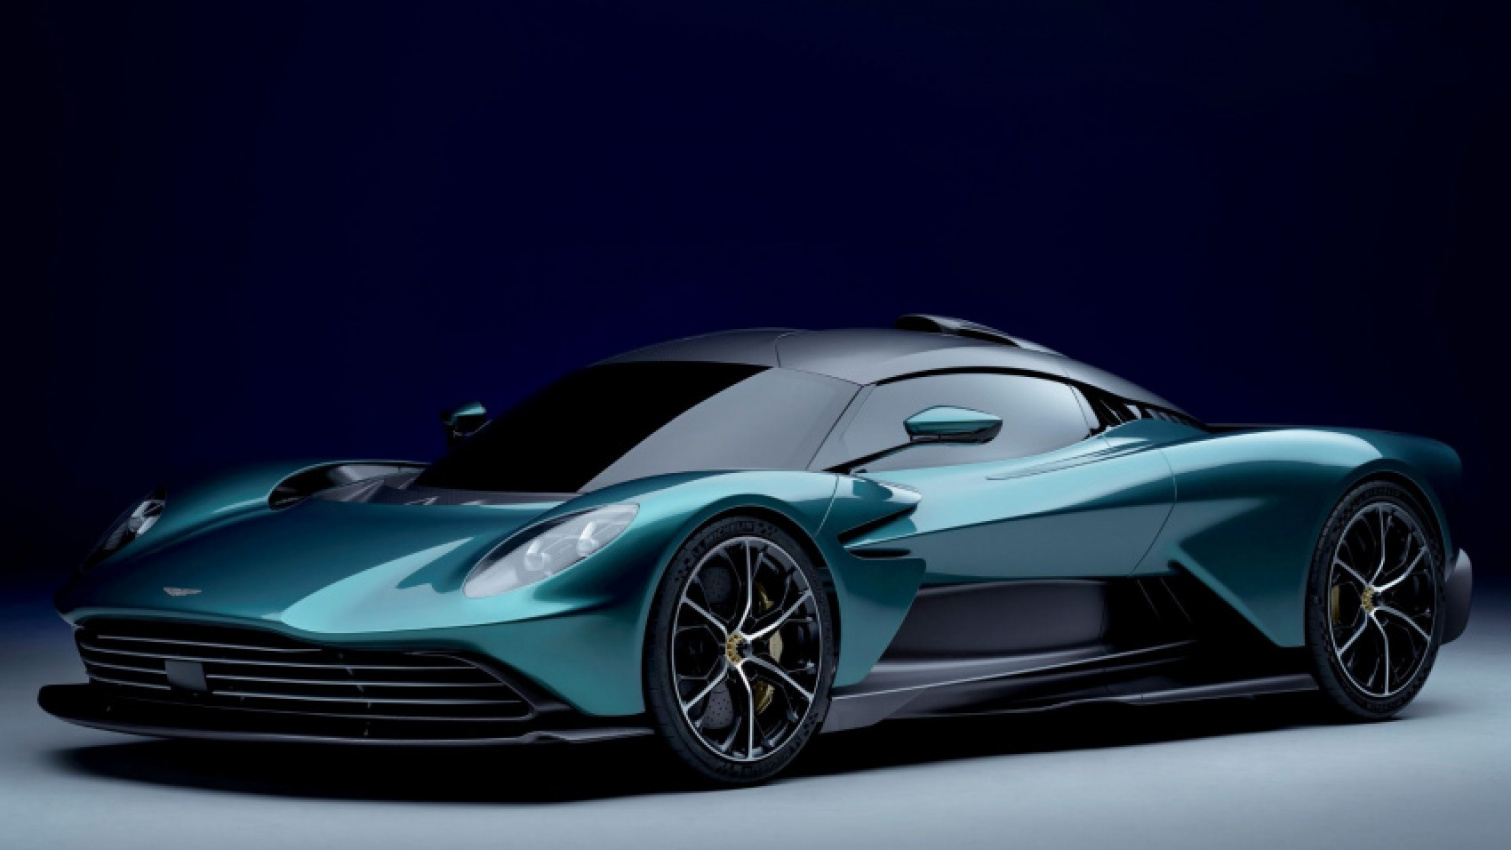 aston martin, autos, cars, american, asian, celebrity, classic, client, europe, exotic, features, handpicked, luxury, modern classic, muscle, news, newsletter, off-road, sports, trucks, aston martin executive says electric cars aren’t viable